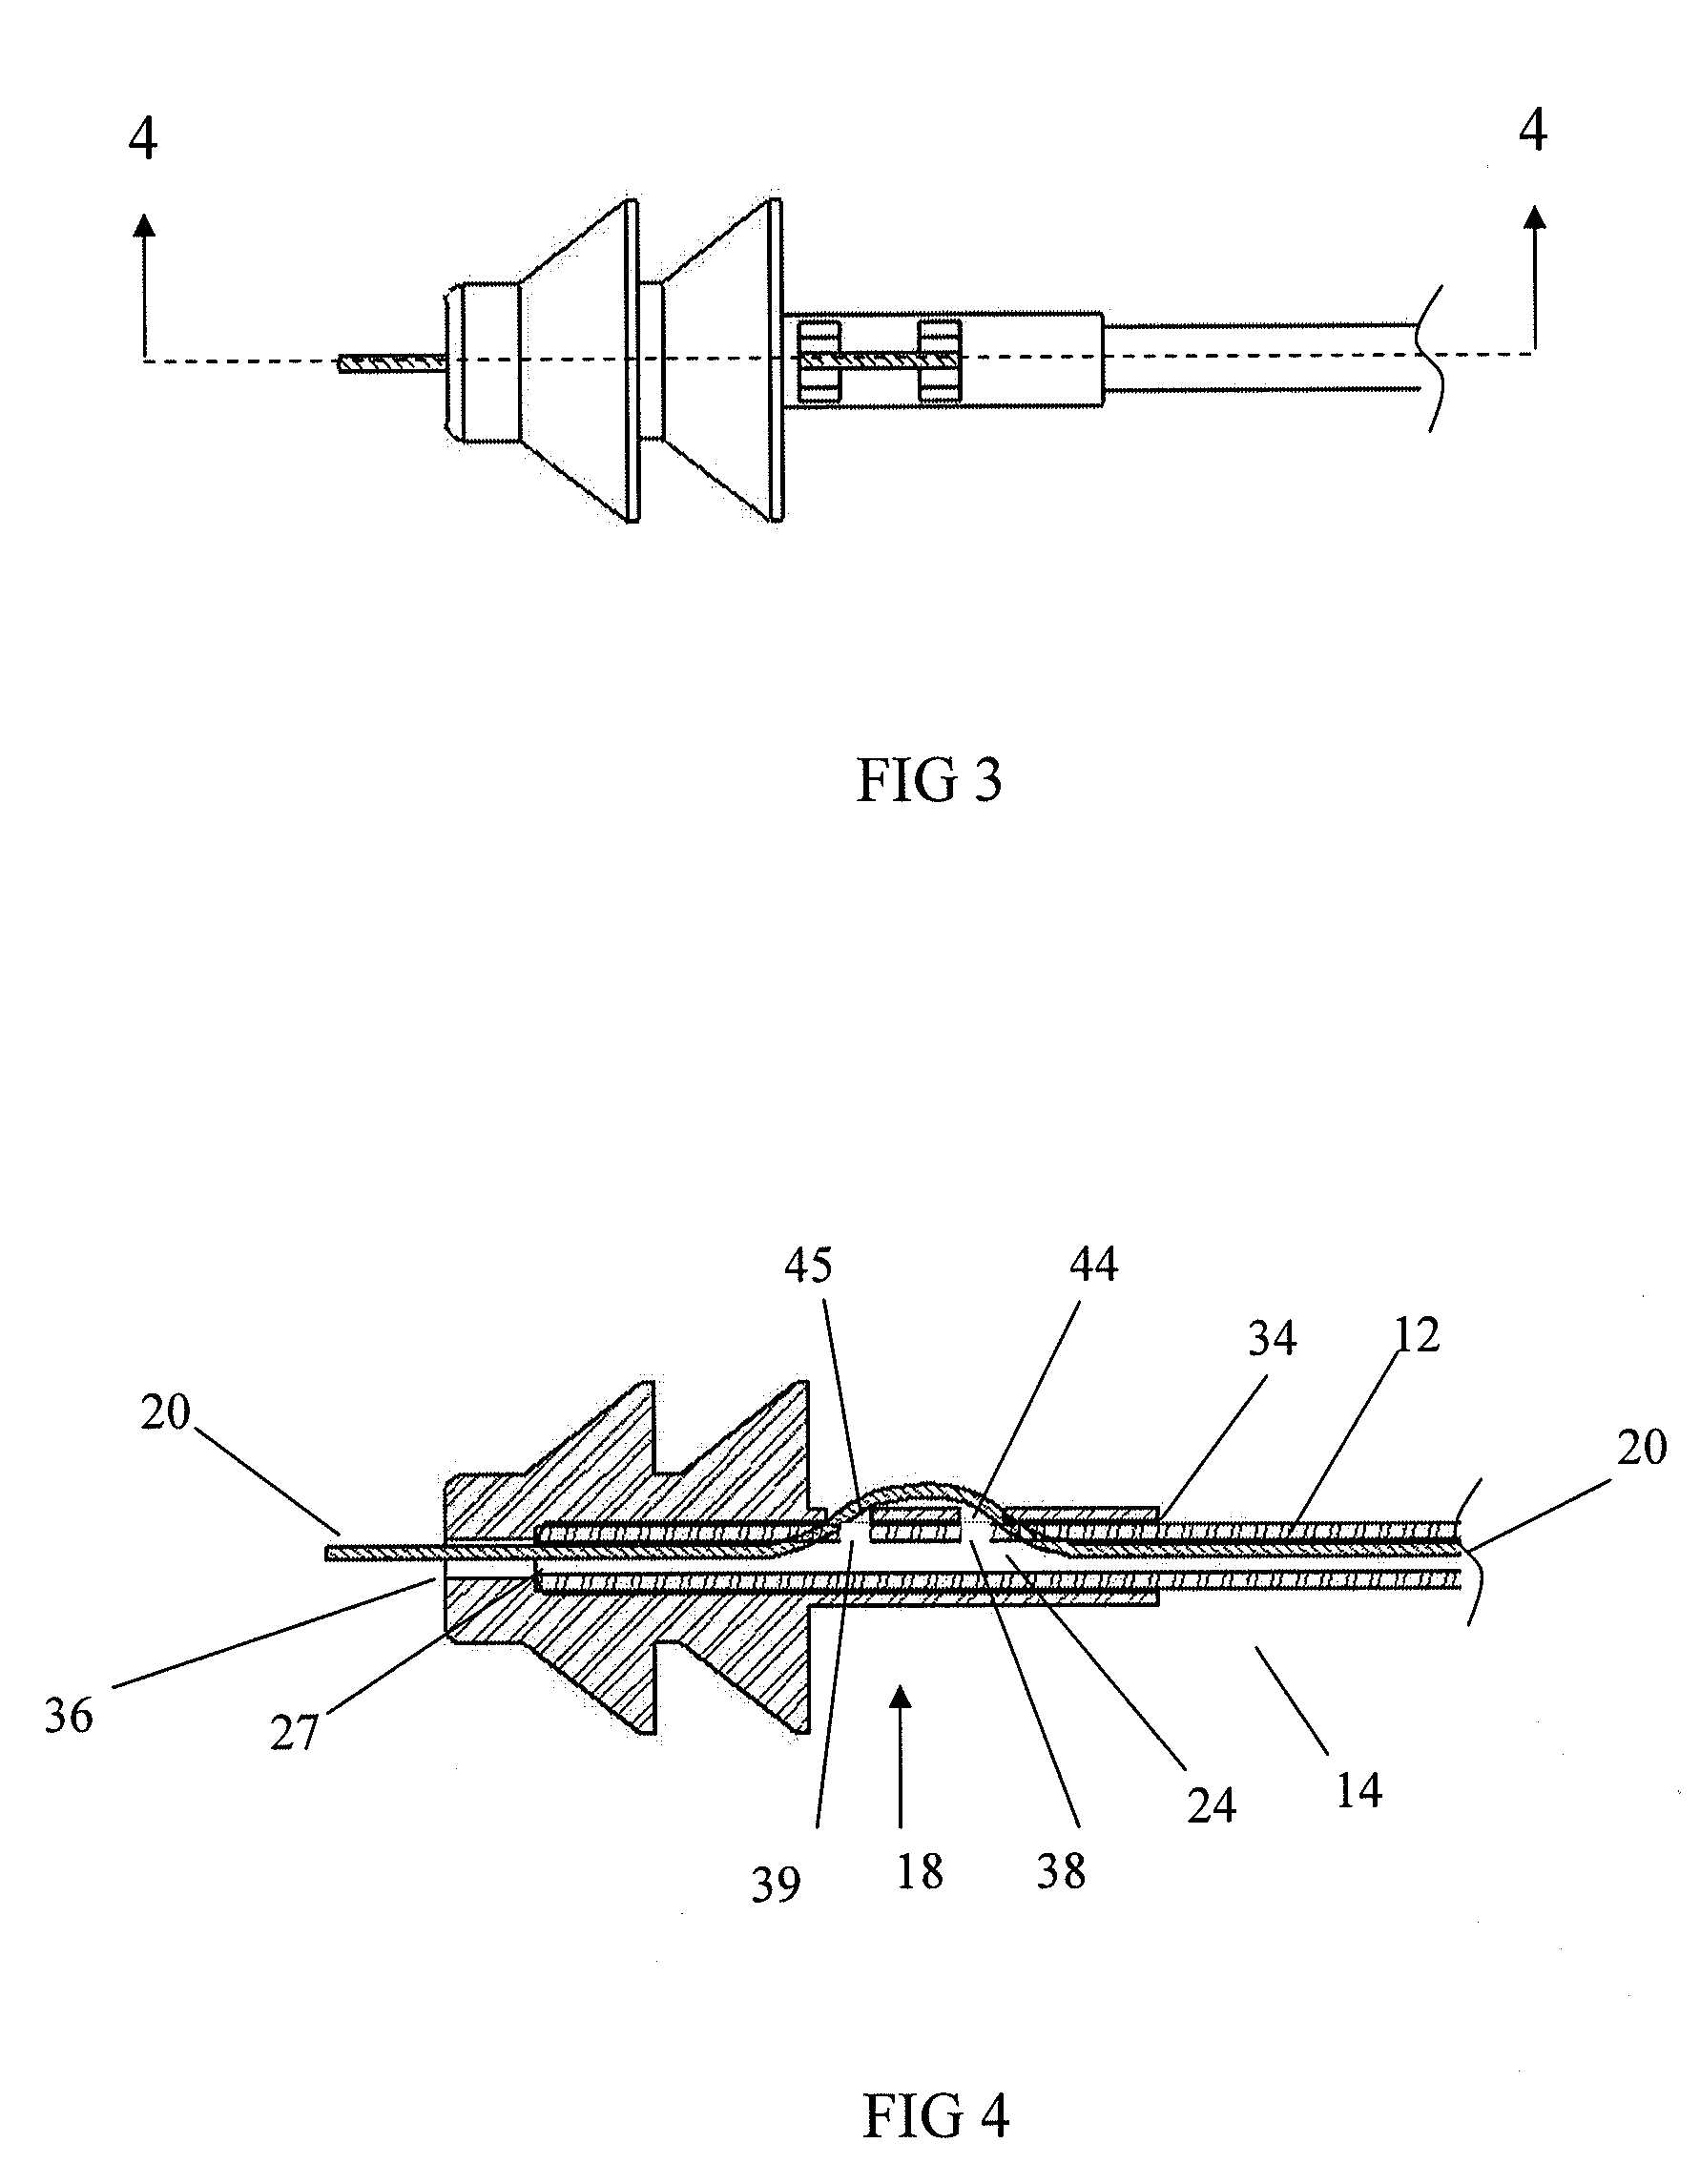 Insertion facilitation device for catheters